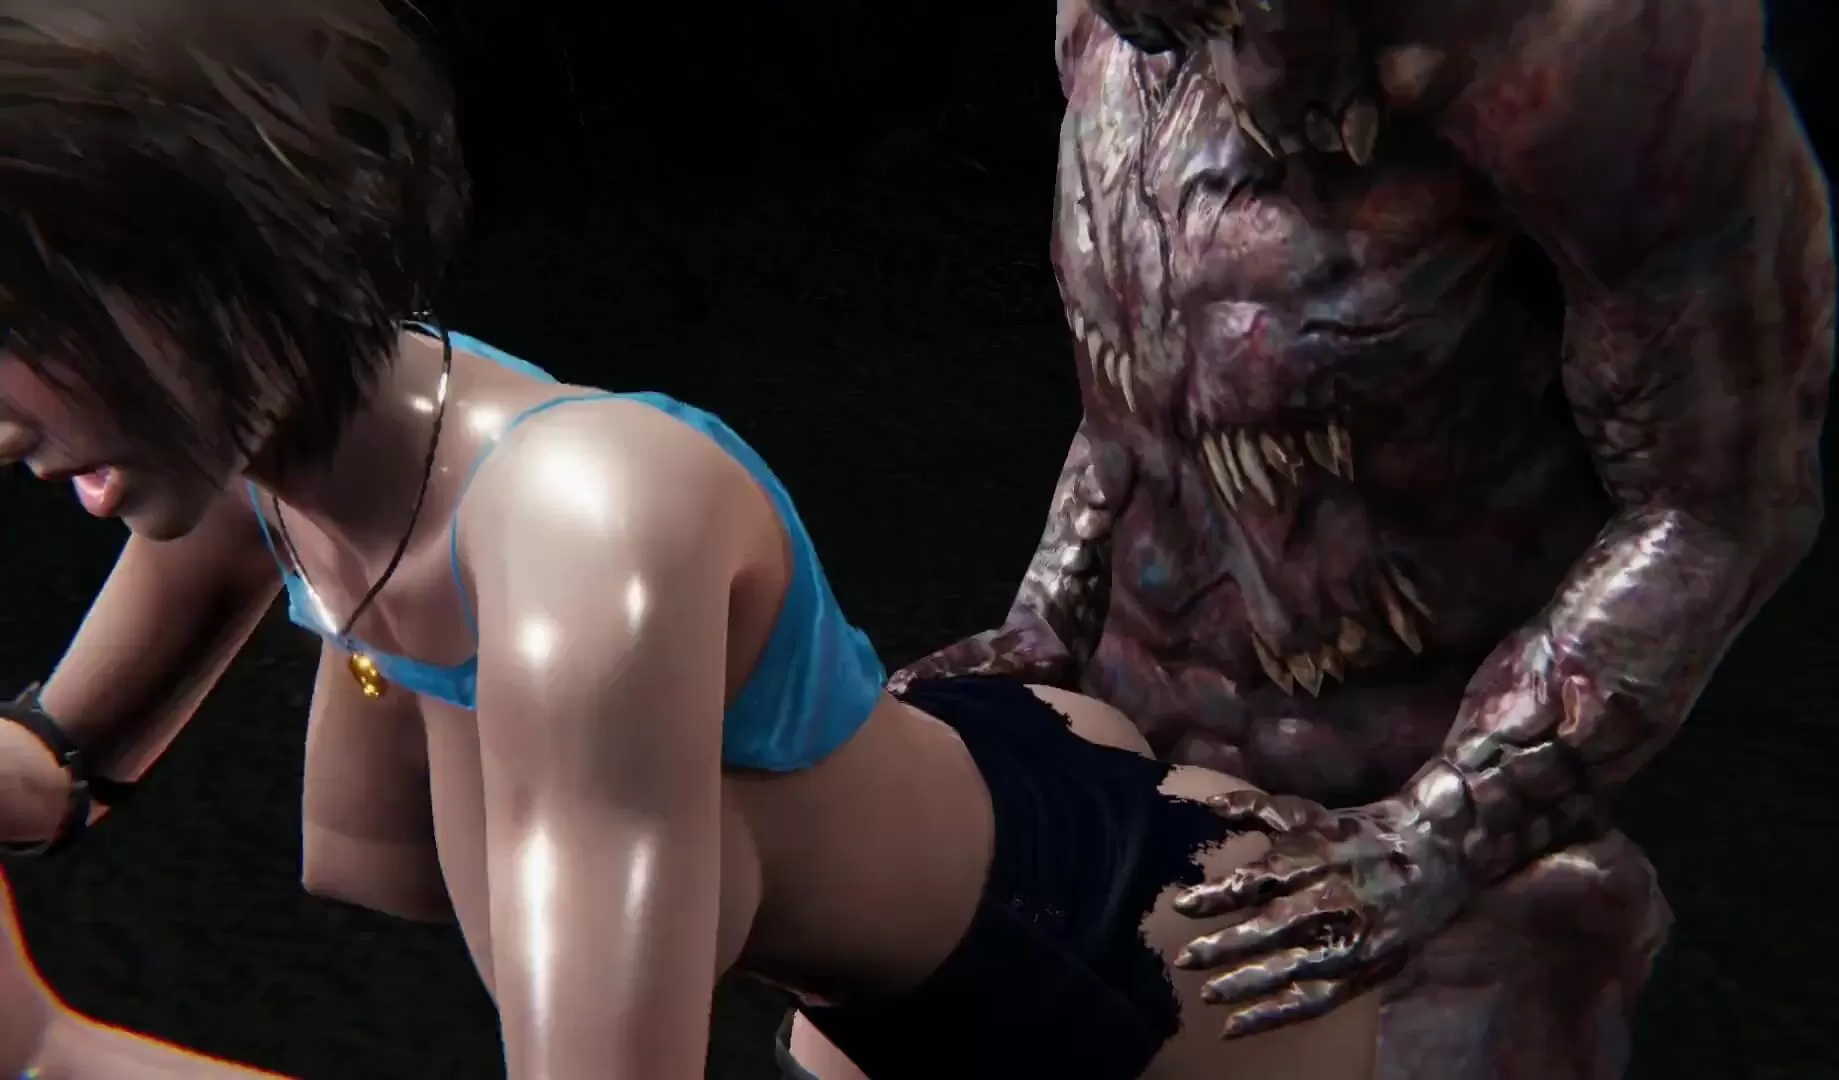 Sexy Resident Evil Hentai Porn - Jill Valentine Resident Evil Anal Zombie Fuck and Deepthroat, ATM,  Squirting 3D Hentai watch online